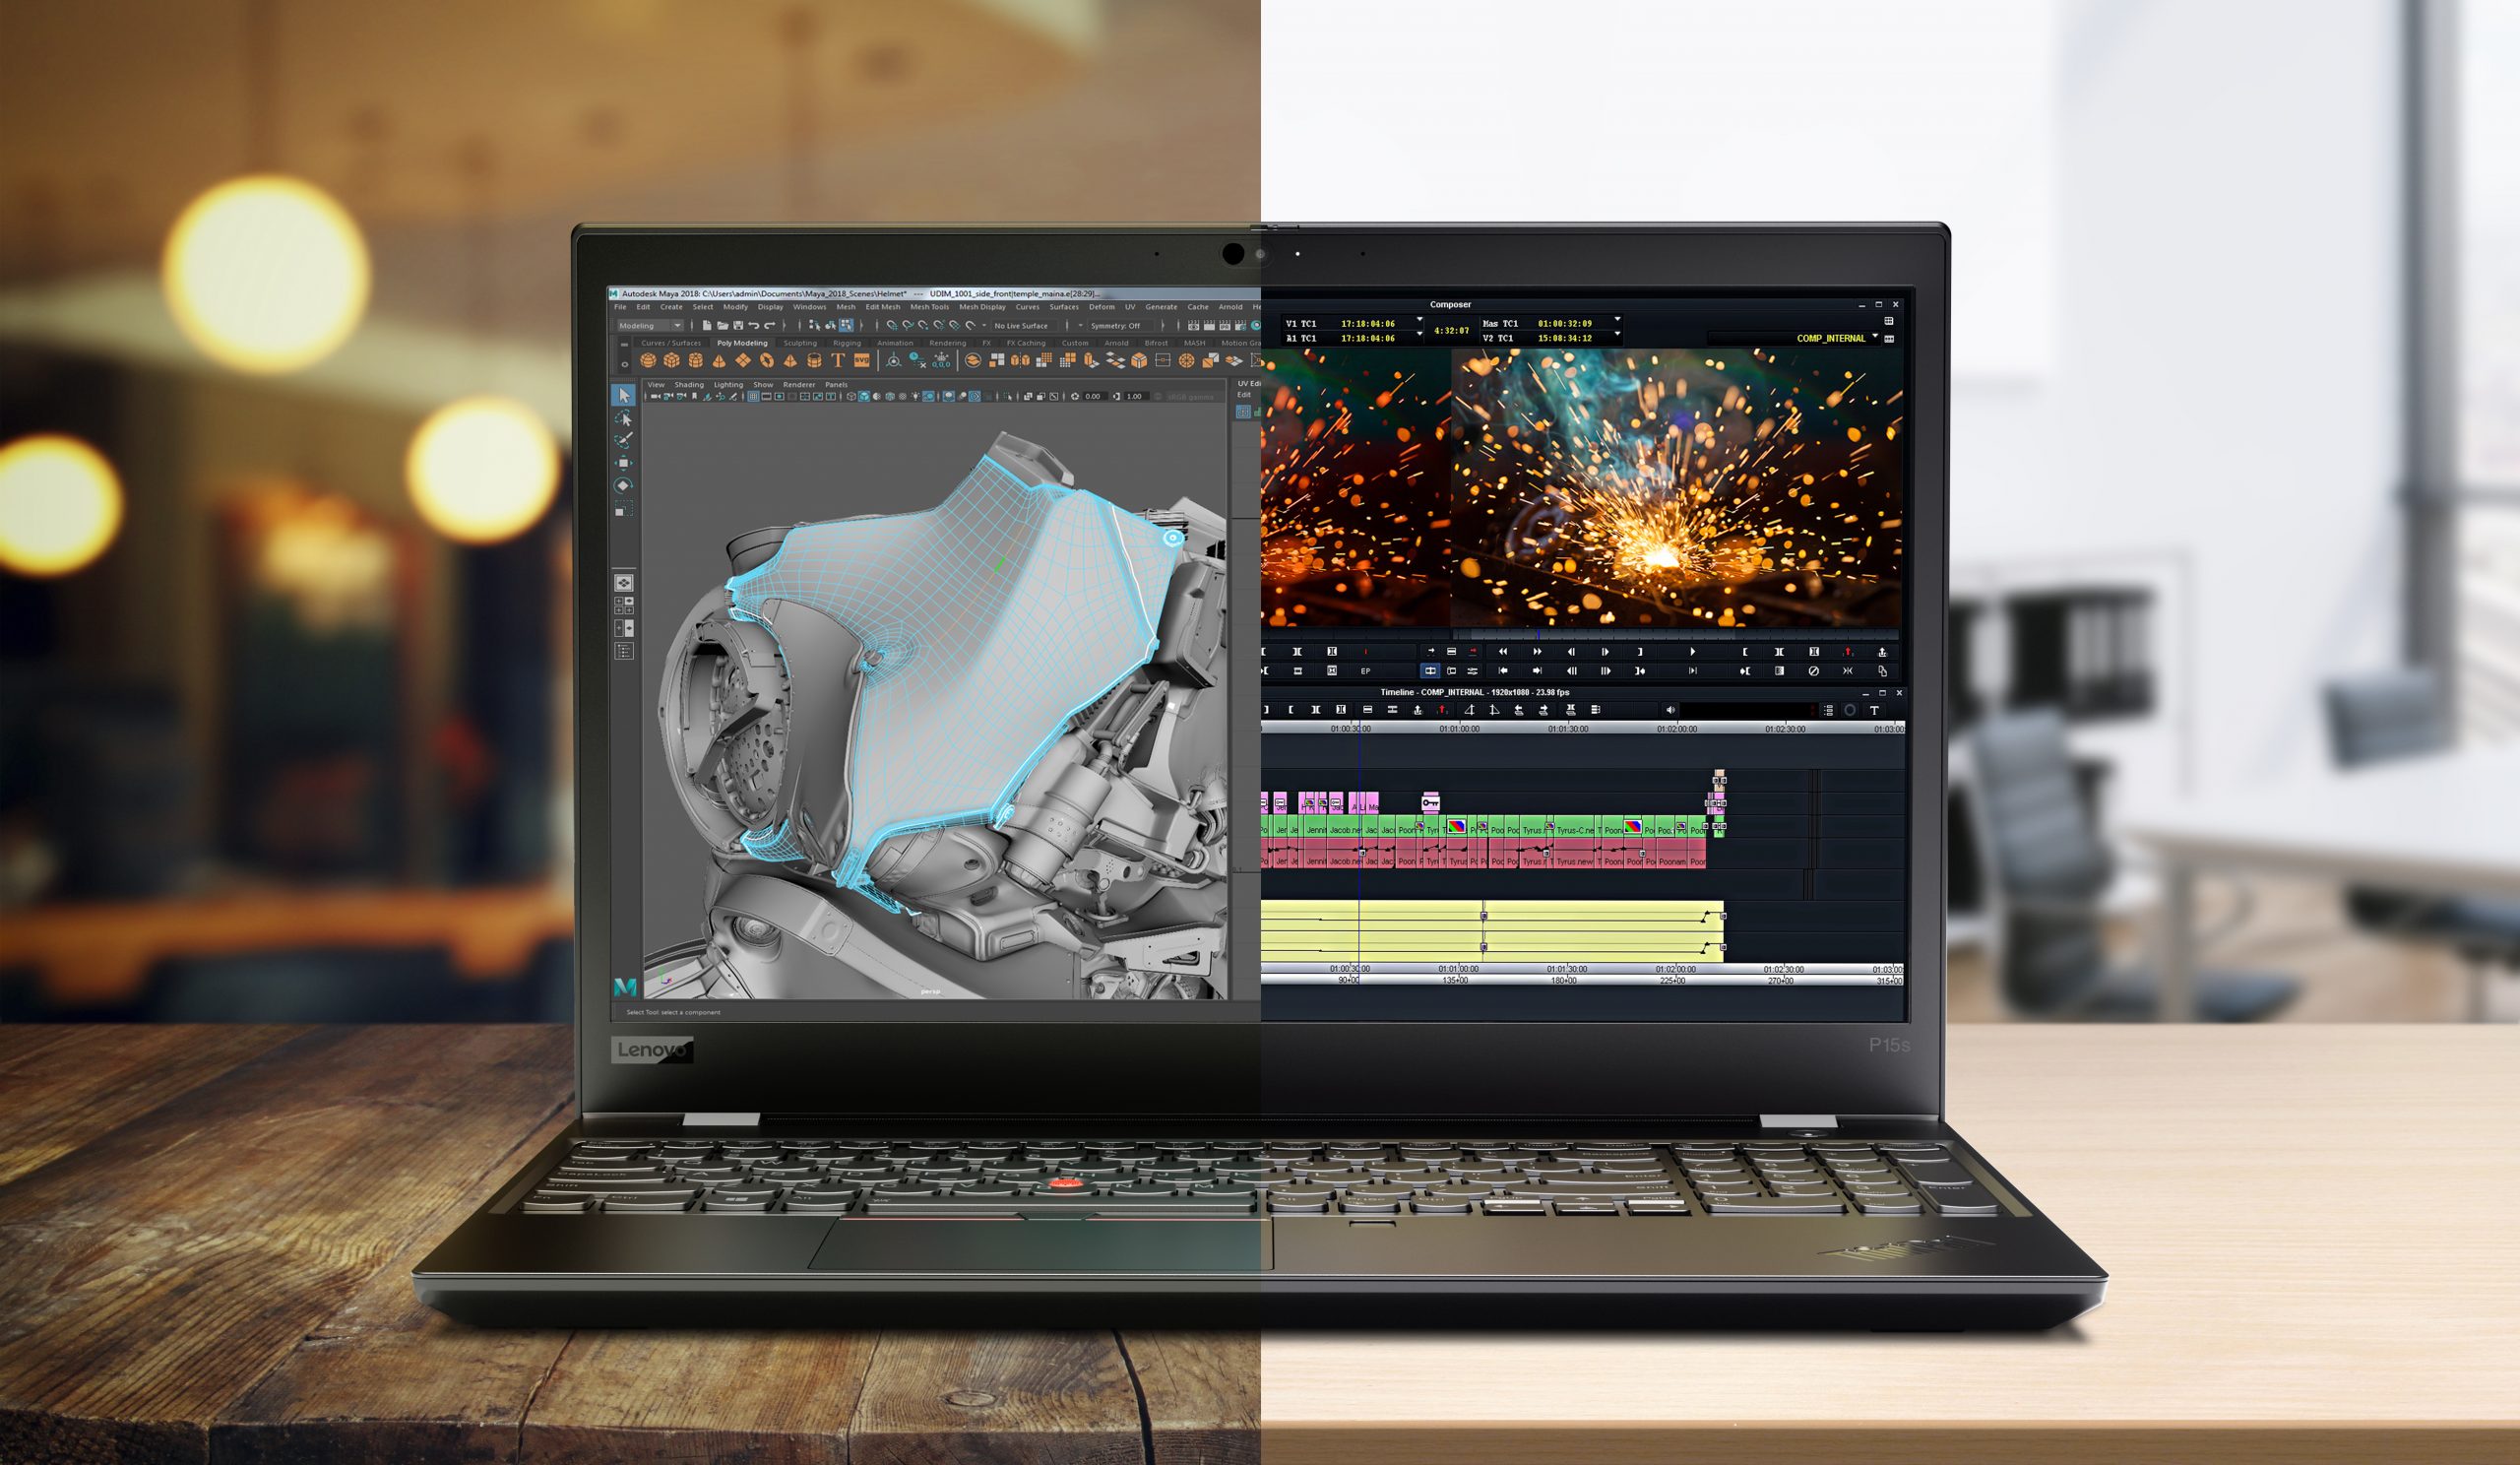 Lenovo Thinkpads Get Refresh And Rebrand For The Ultra Portable Cad Laptops Develop3d